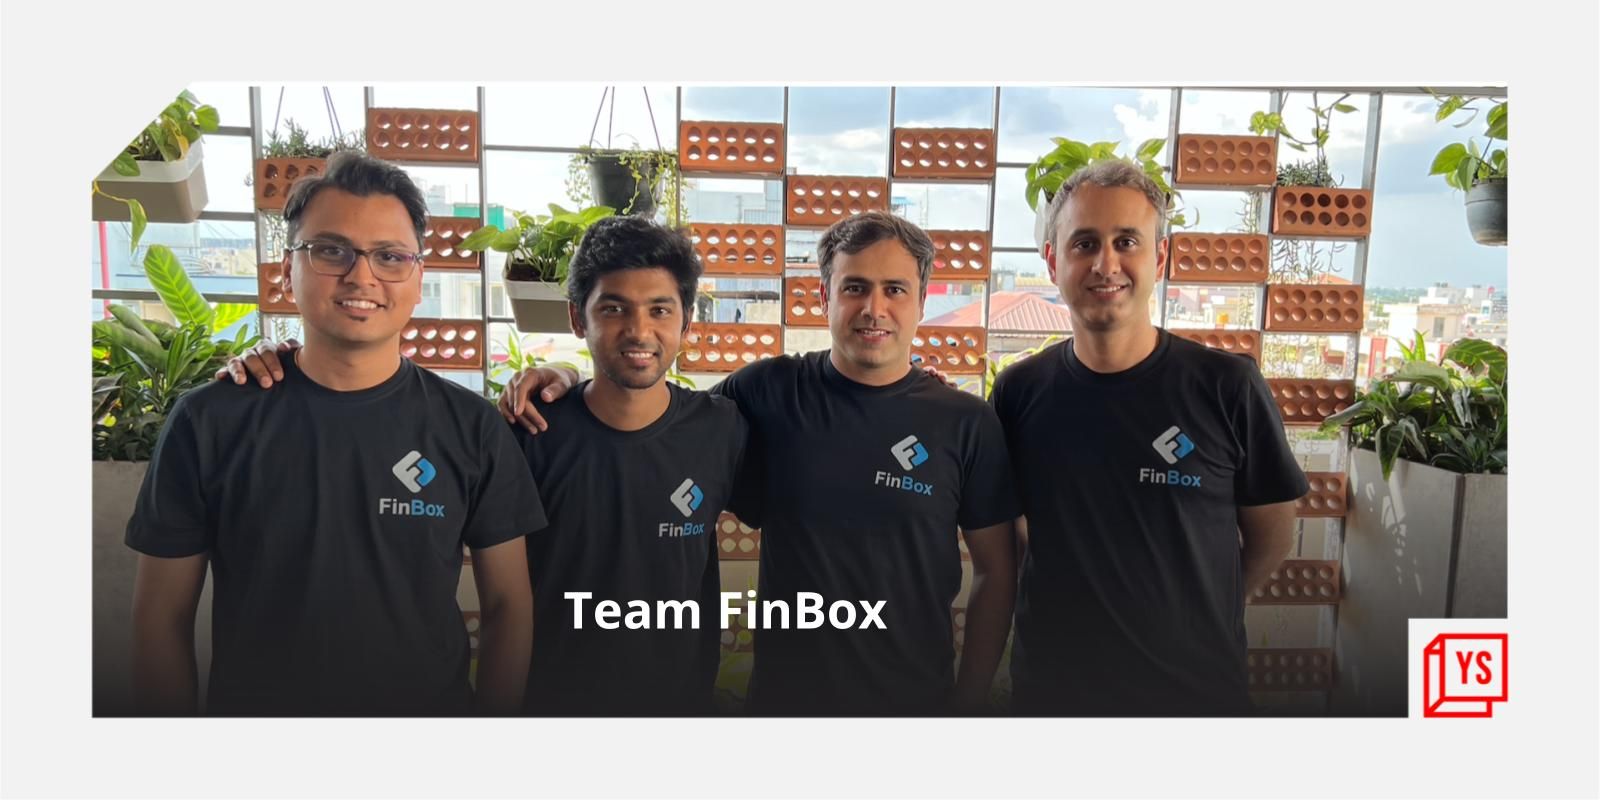 [Funding alert] Fintech startup FinBox raises $15M in Series A round led by A91 Partners 